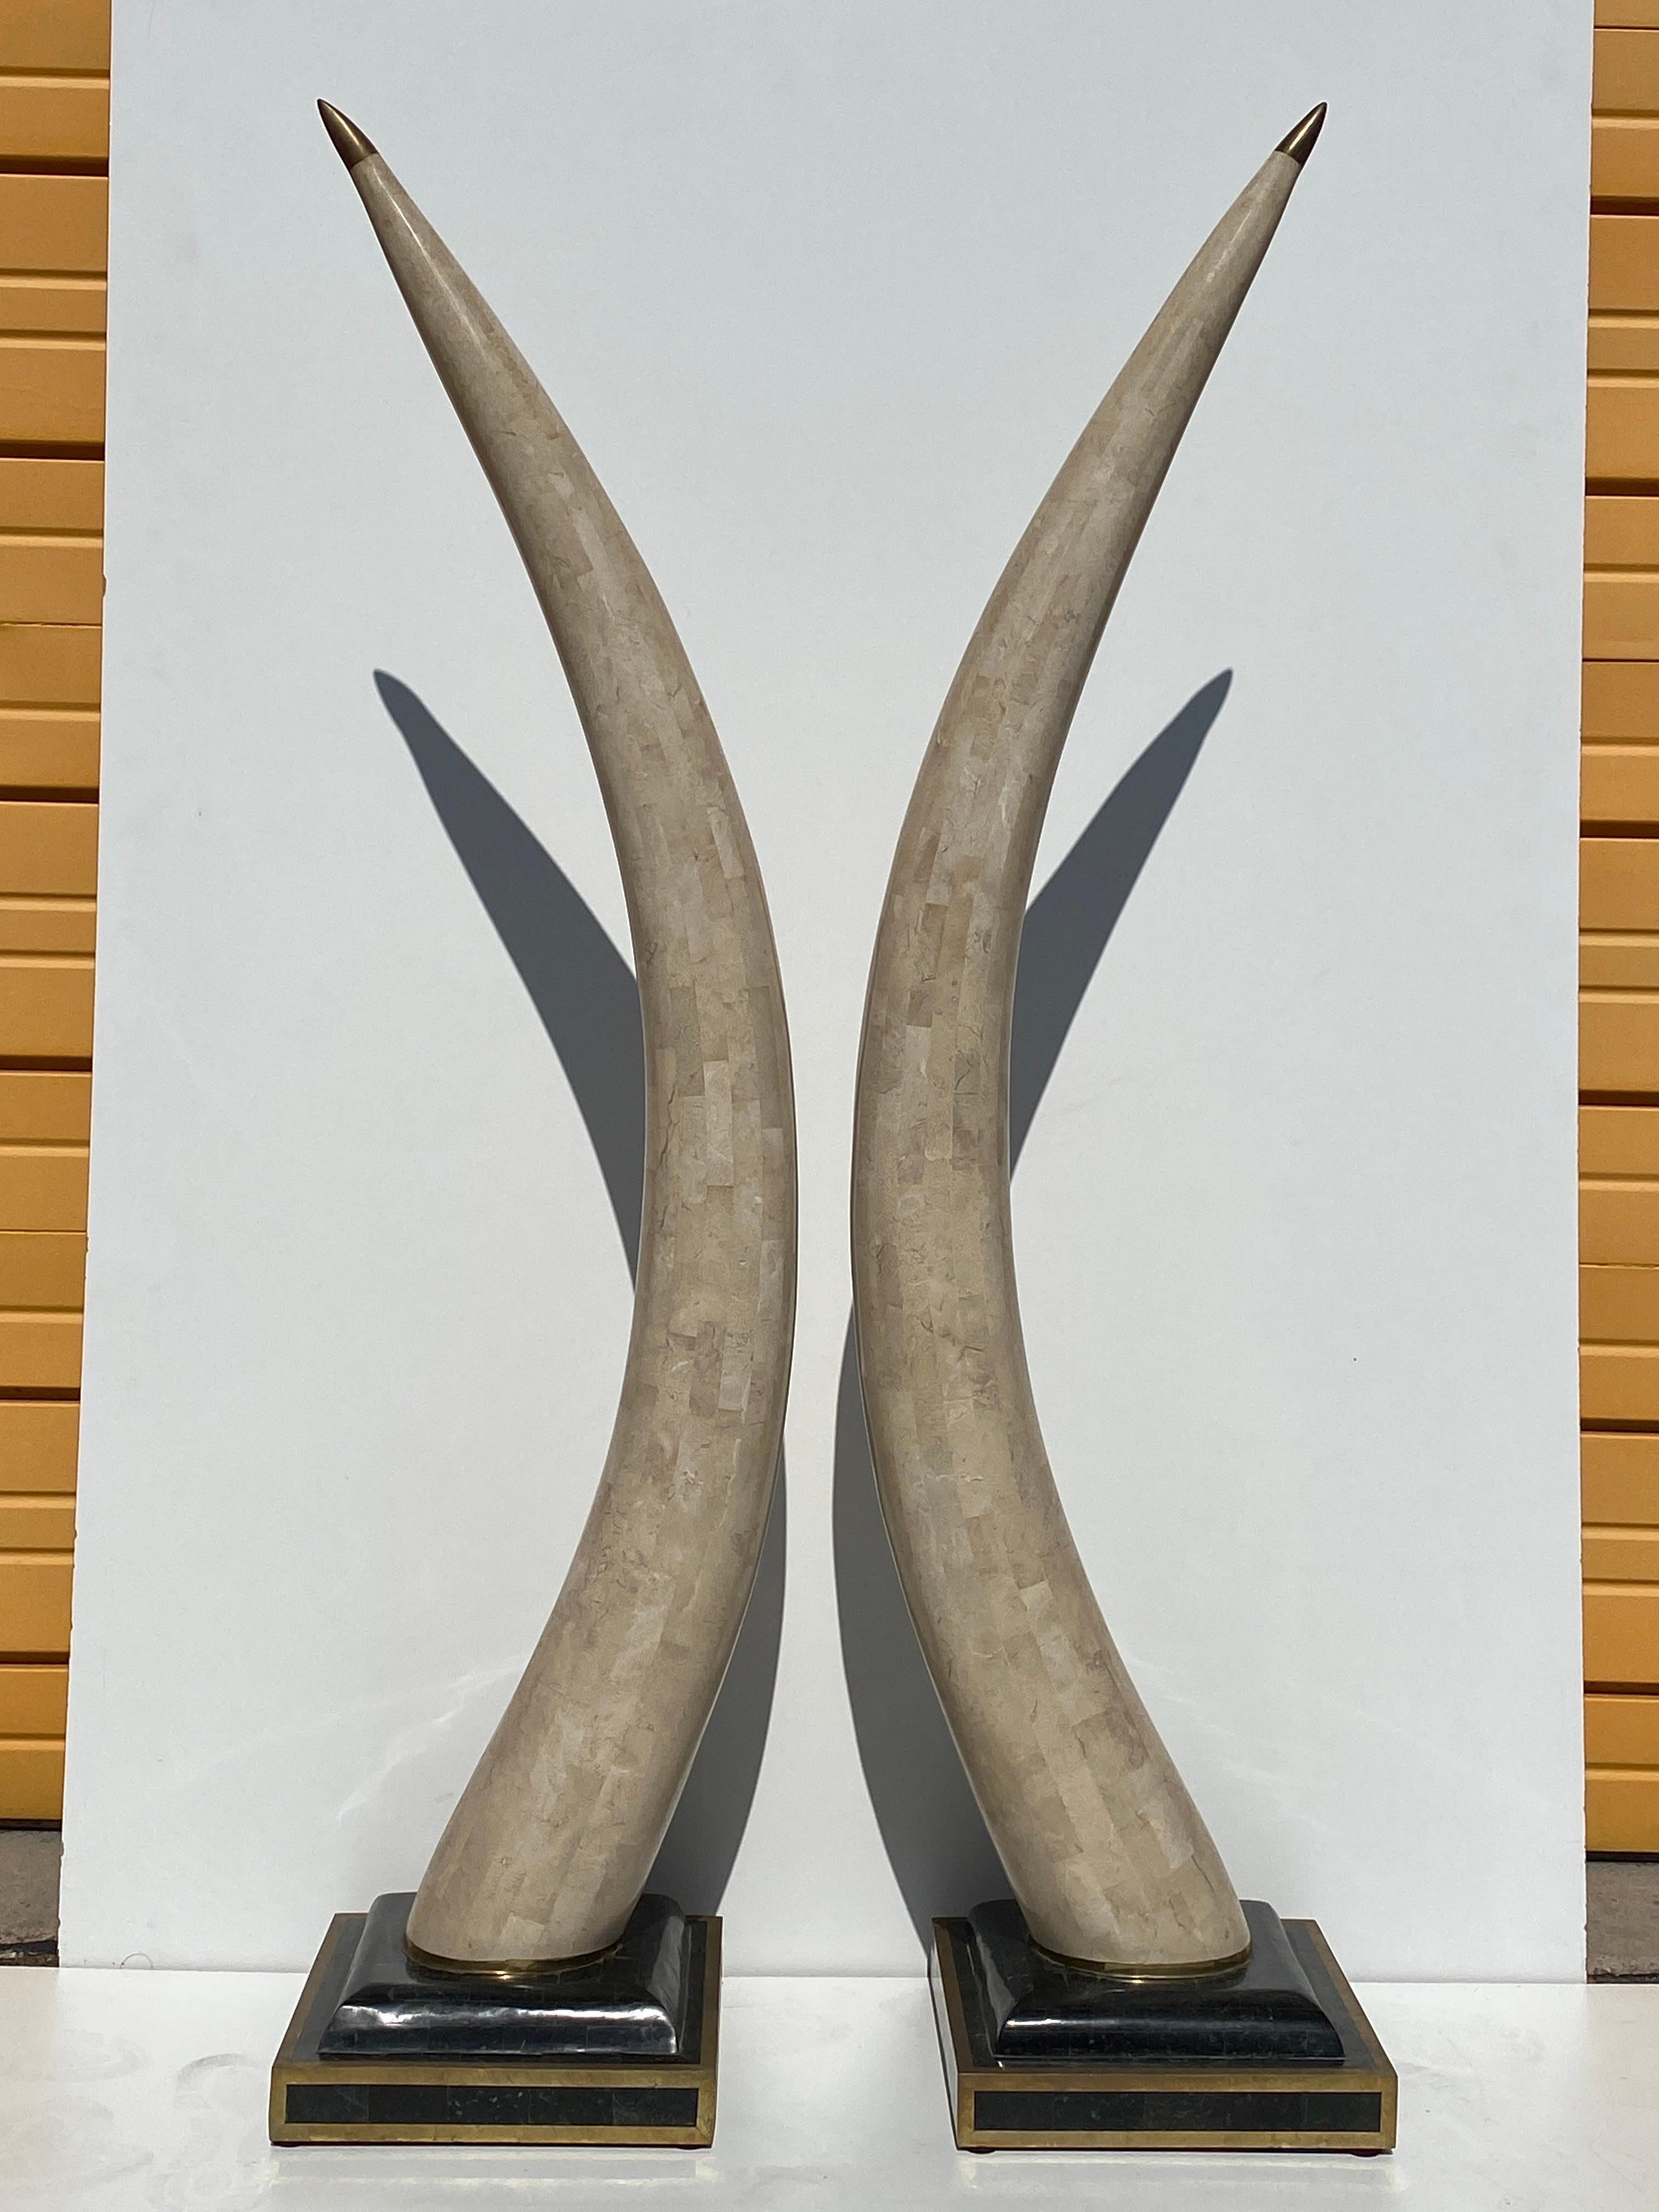 Pair of Maitland Smith faux elephant tusks made of tessellated fossil coral and horn with brass details. Each tusk is 58